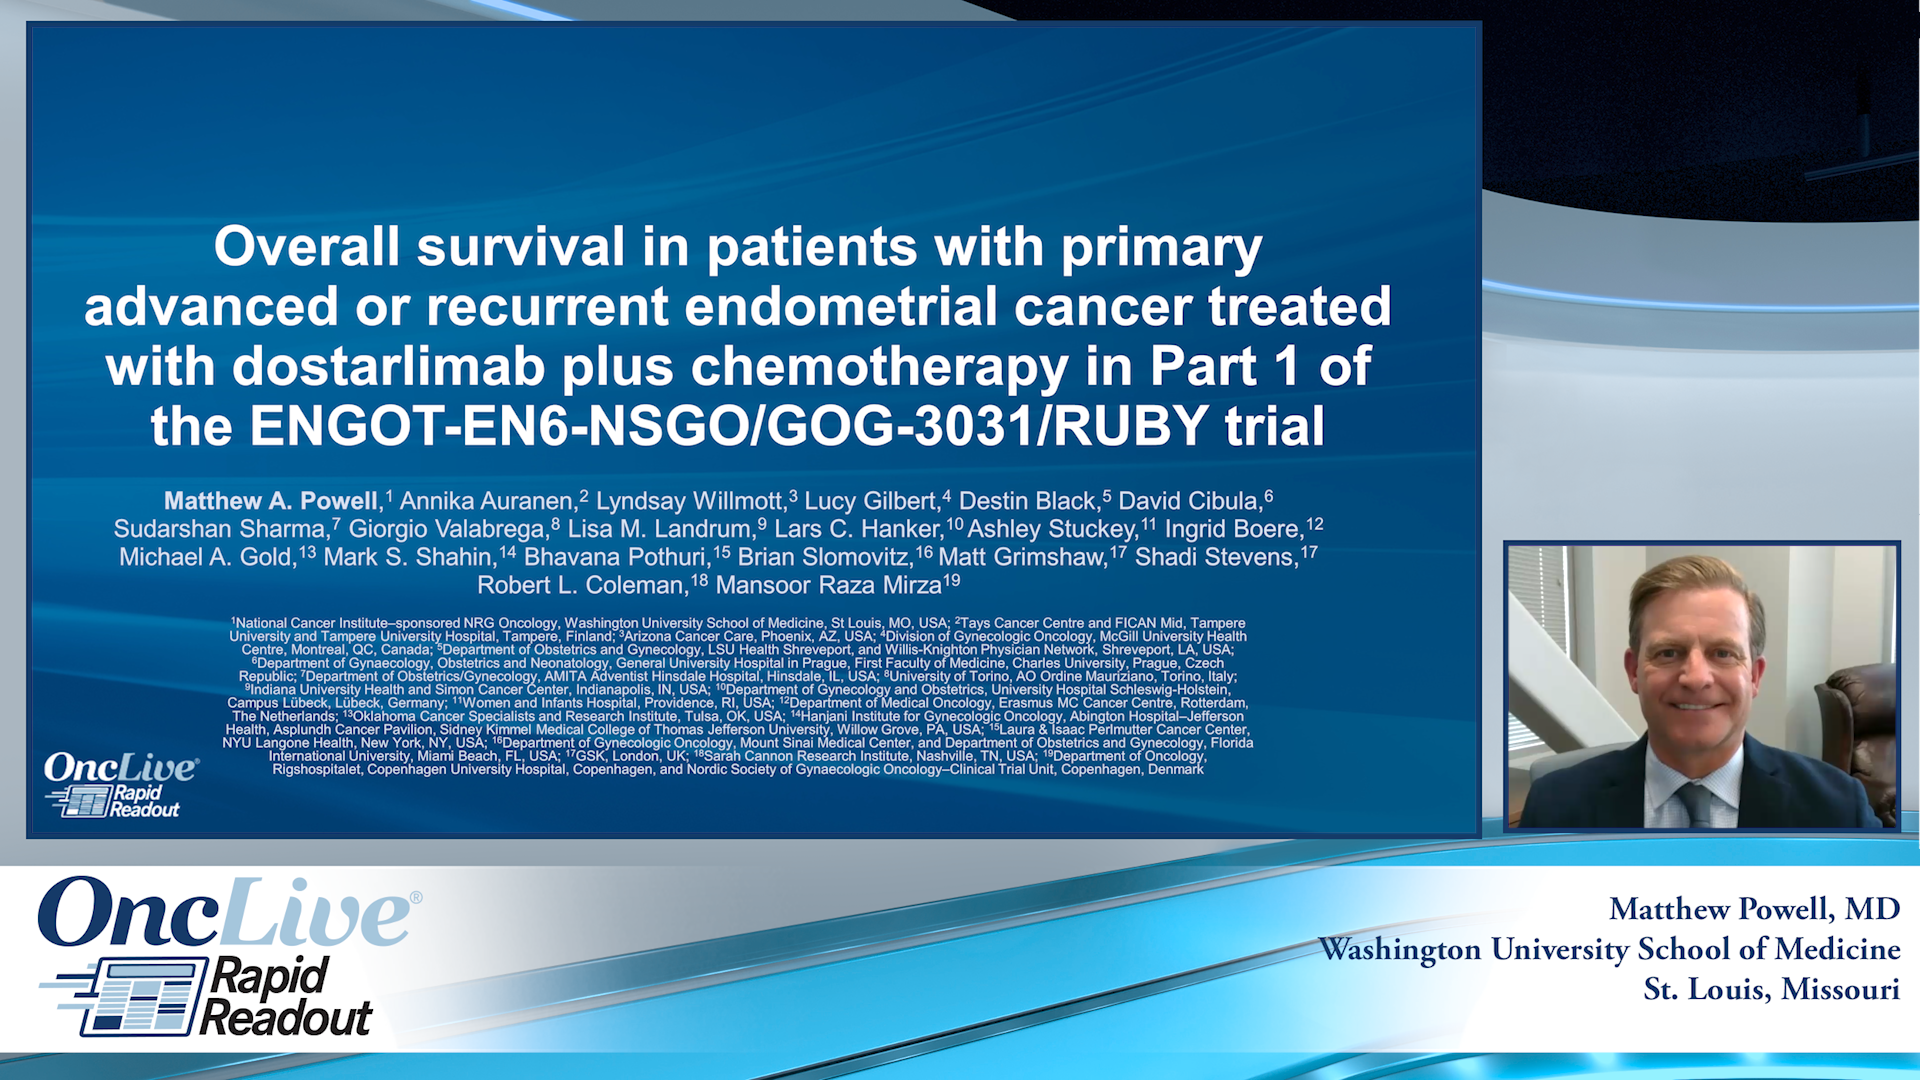 Overall Survival in Patients With Primary Advanced or Recurrent Endometrial Cancer Treated With Dostarlimab Plus Chemotherapy in Part 1 of the ENGOT-EN6-NSGO/GOG-3031/RUBY Trial